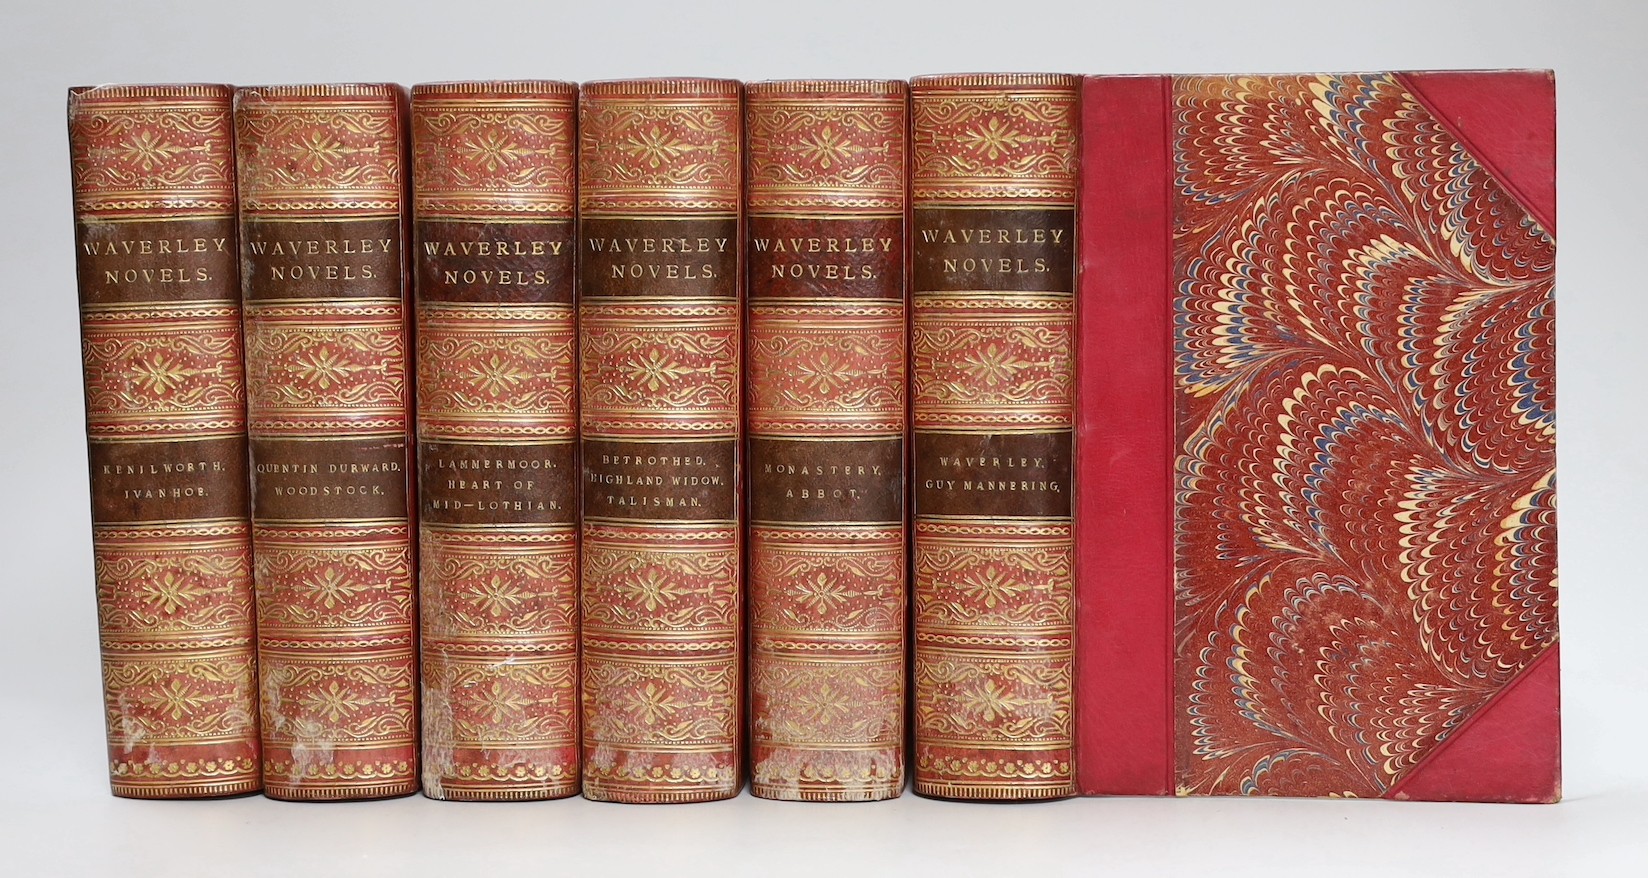 Scott, Sir Walter - The Waverley Novels, 6 vols, 8vo, red morocco with marbled boards, Adam and Charles Black, Edinburgh, 1886-87